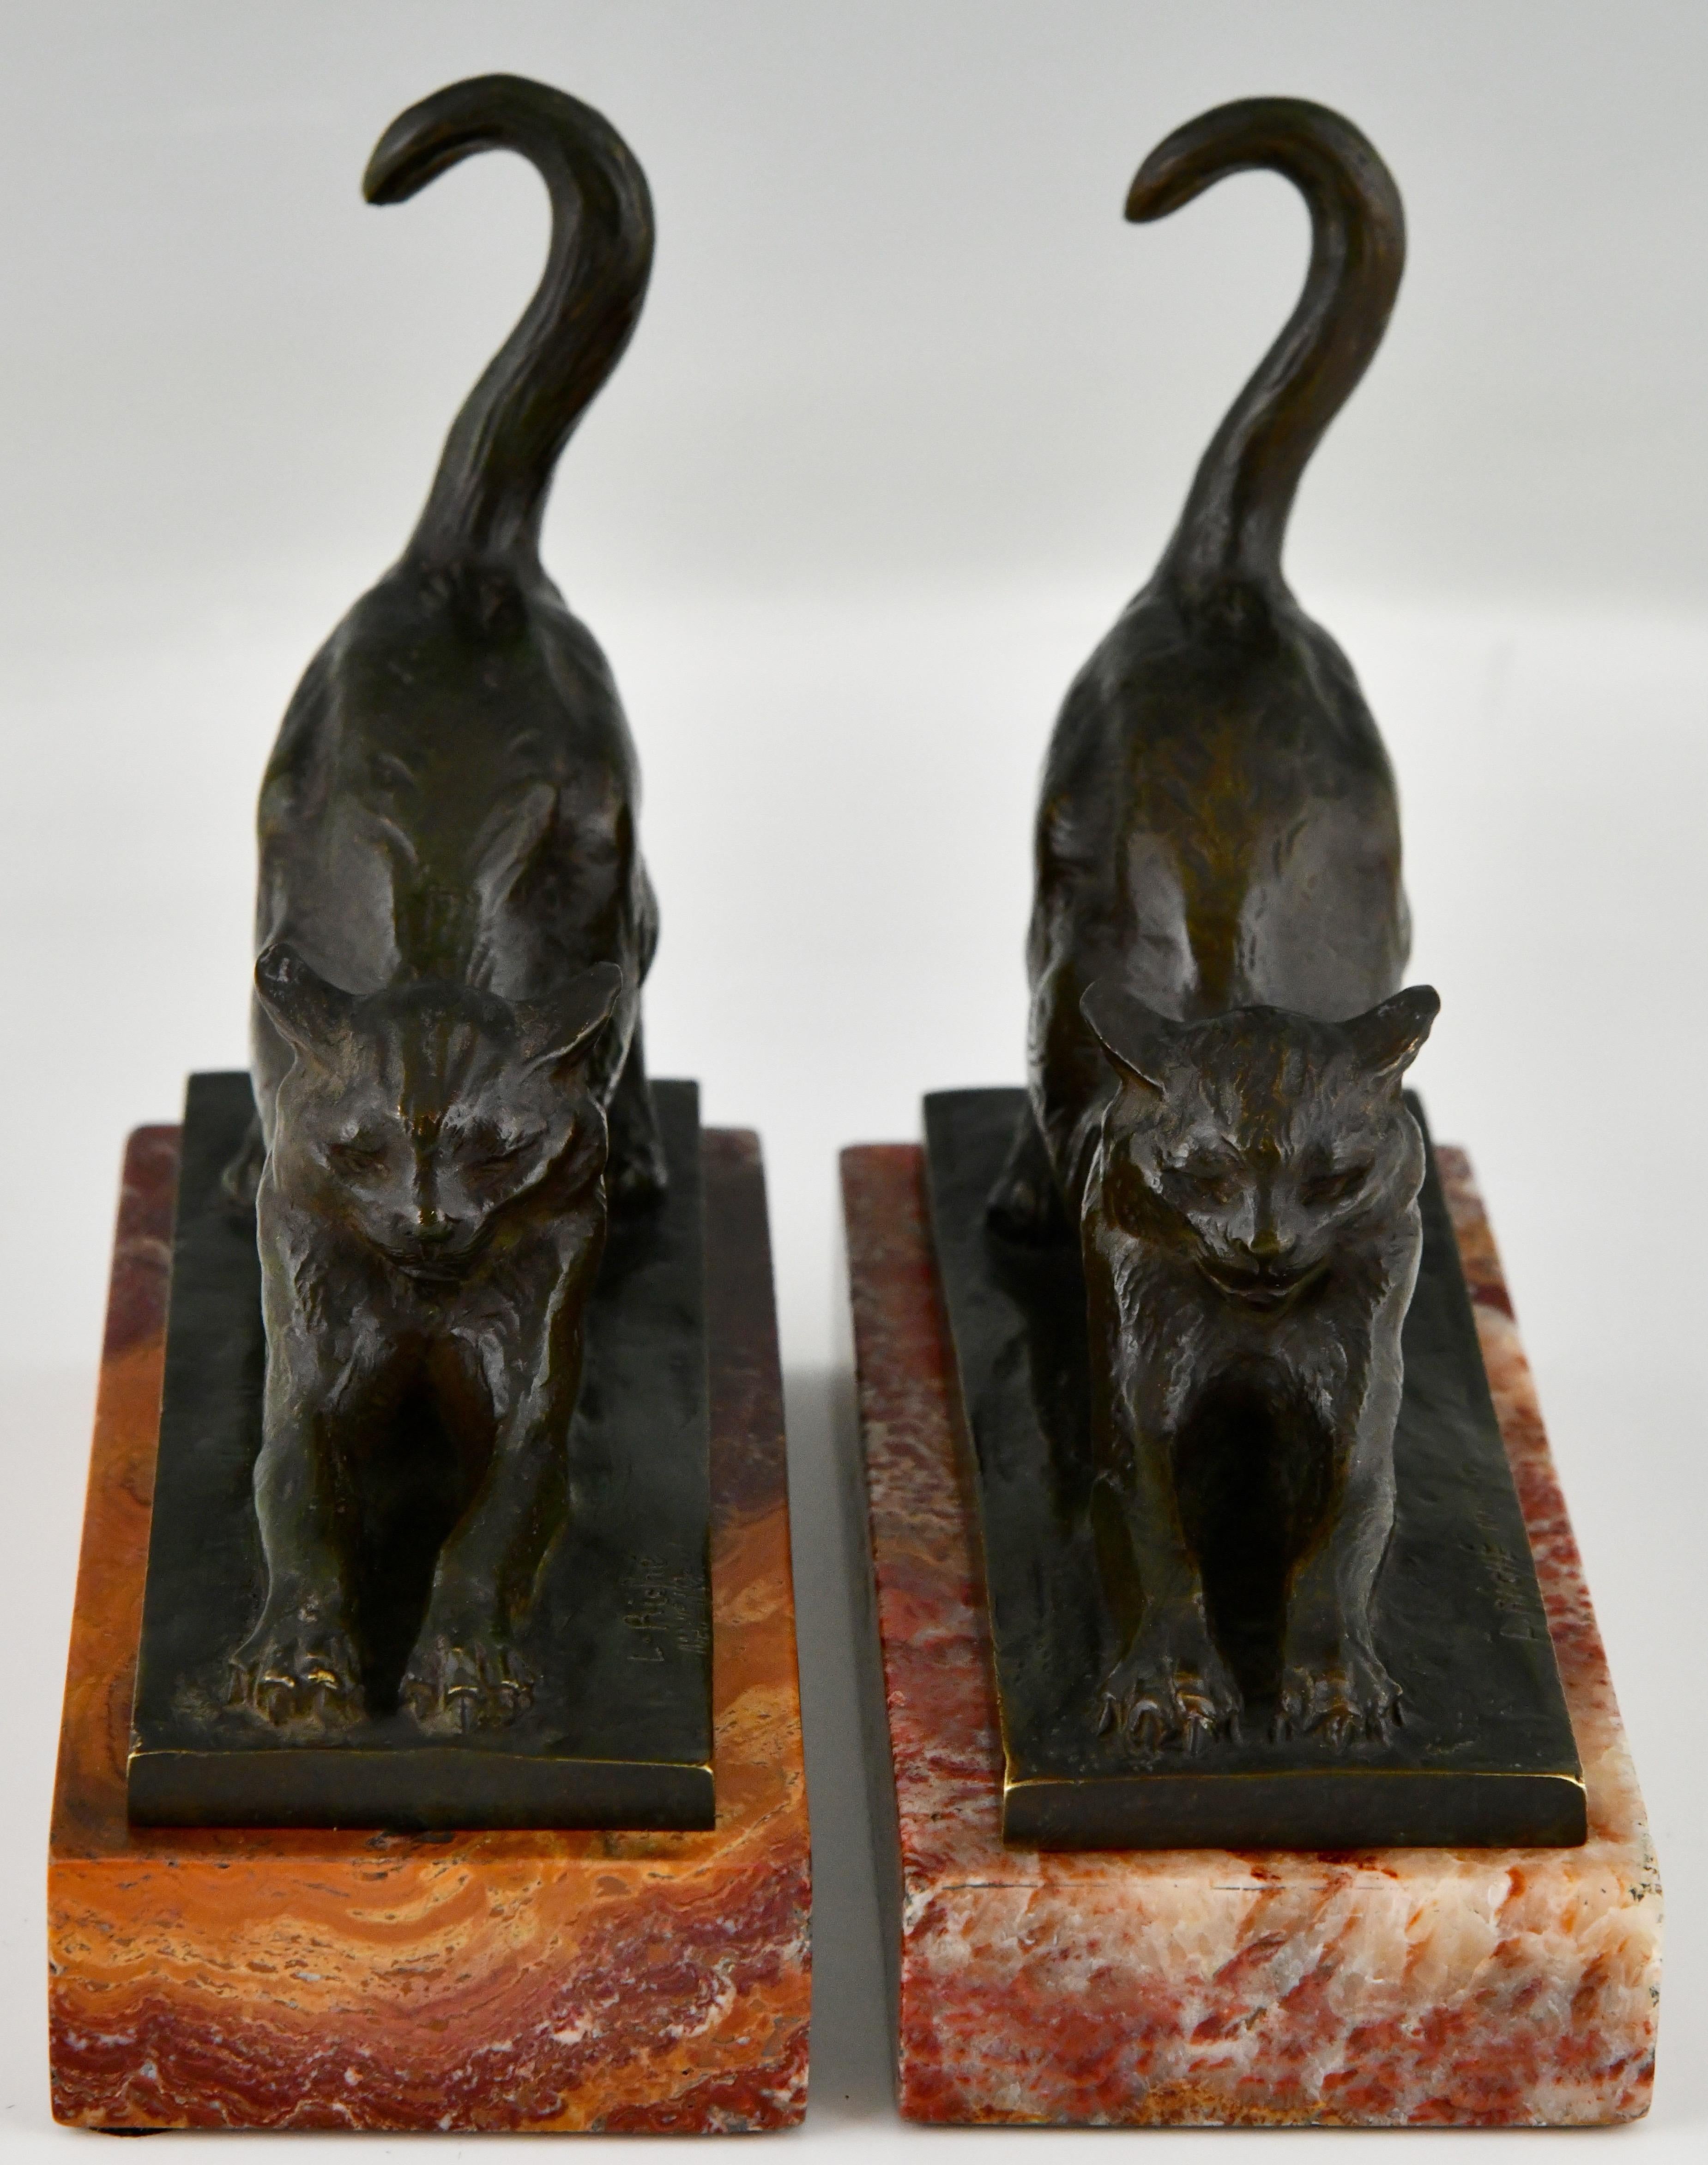 French Art Deco Bronze Cat Bookends by Louis Riche, Patrouilleau Foundry, France 1920 For Sale